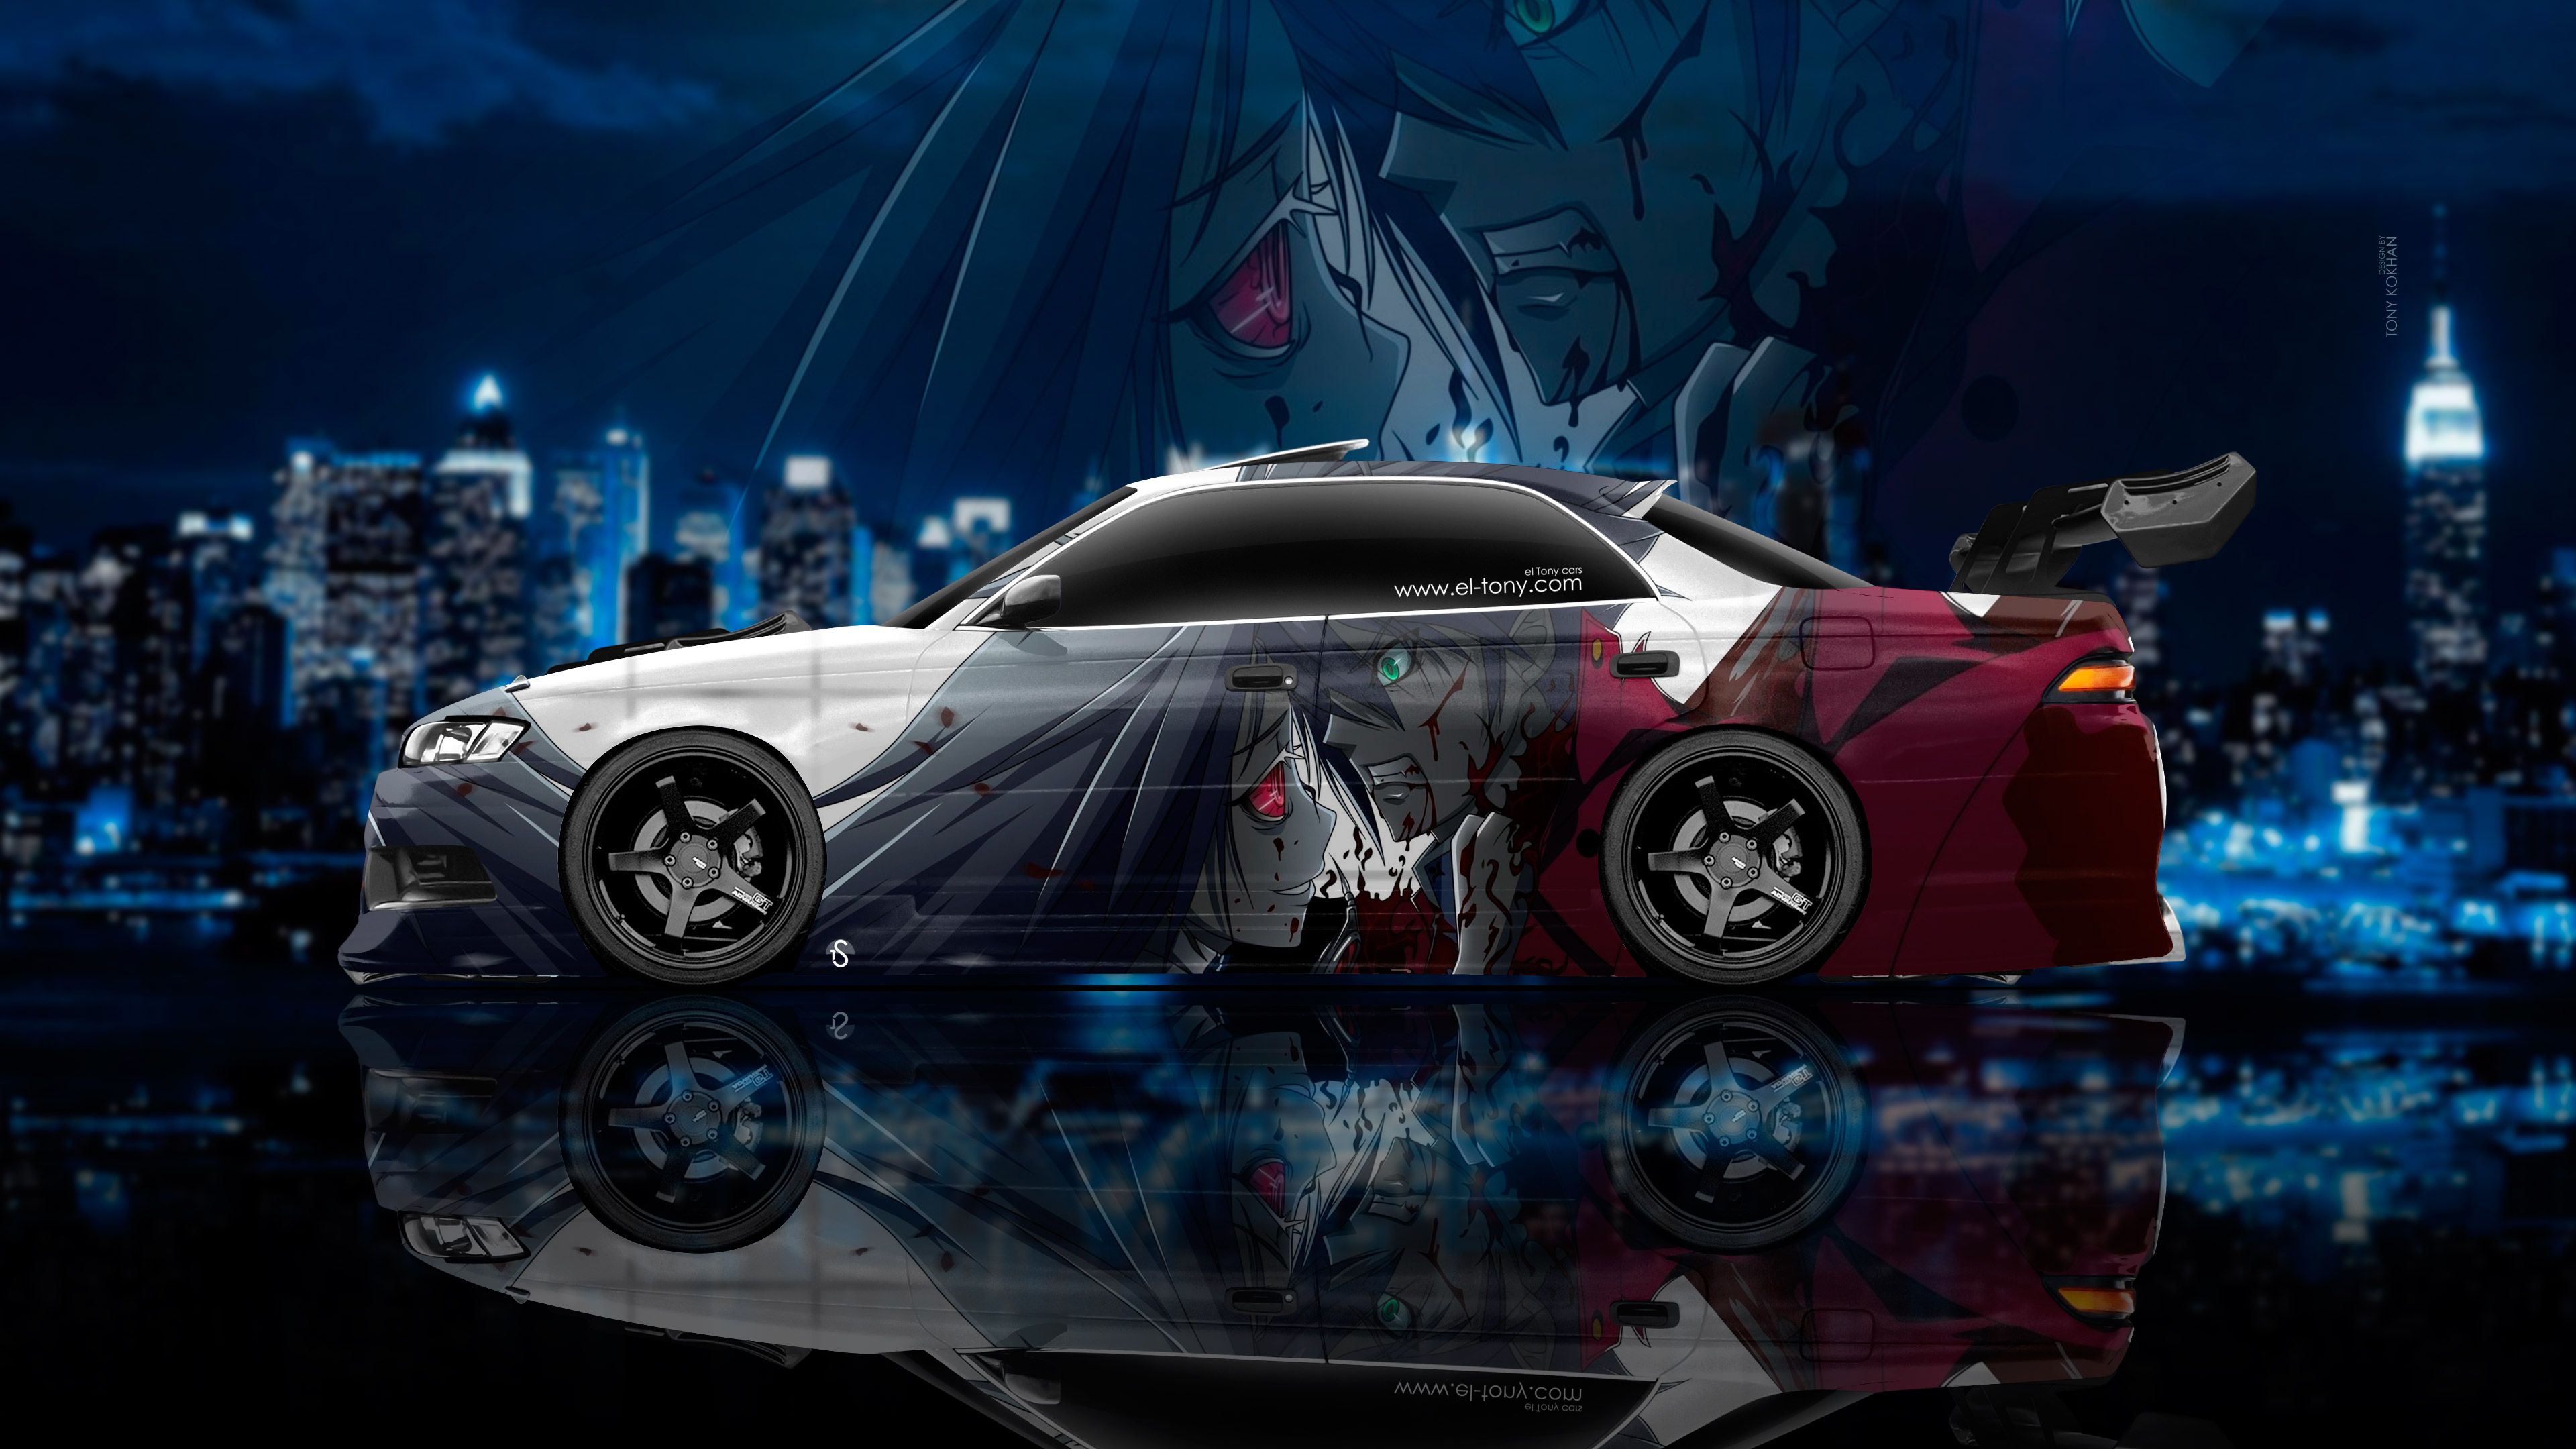 Jdm X Anime Wallpapers Wallpaper Cave